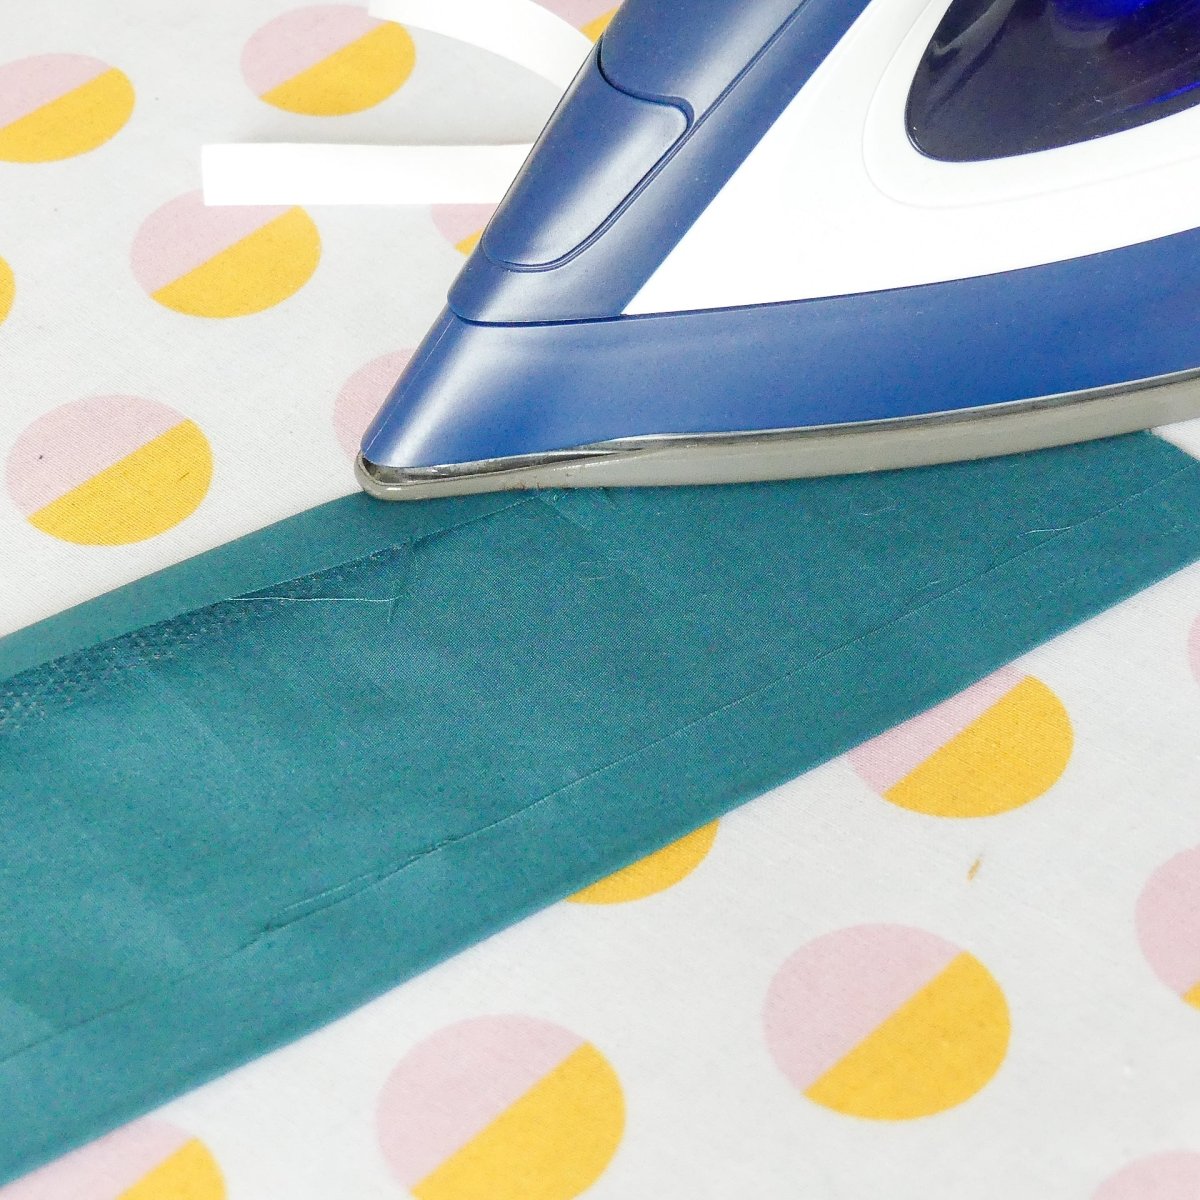 Ironing hem in place with fusible hem tape